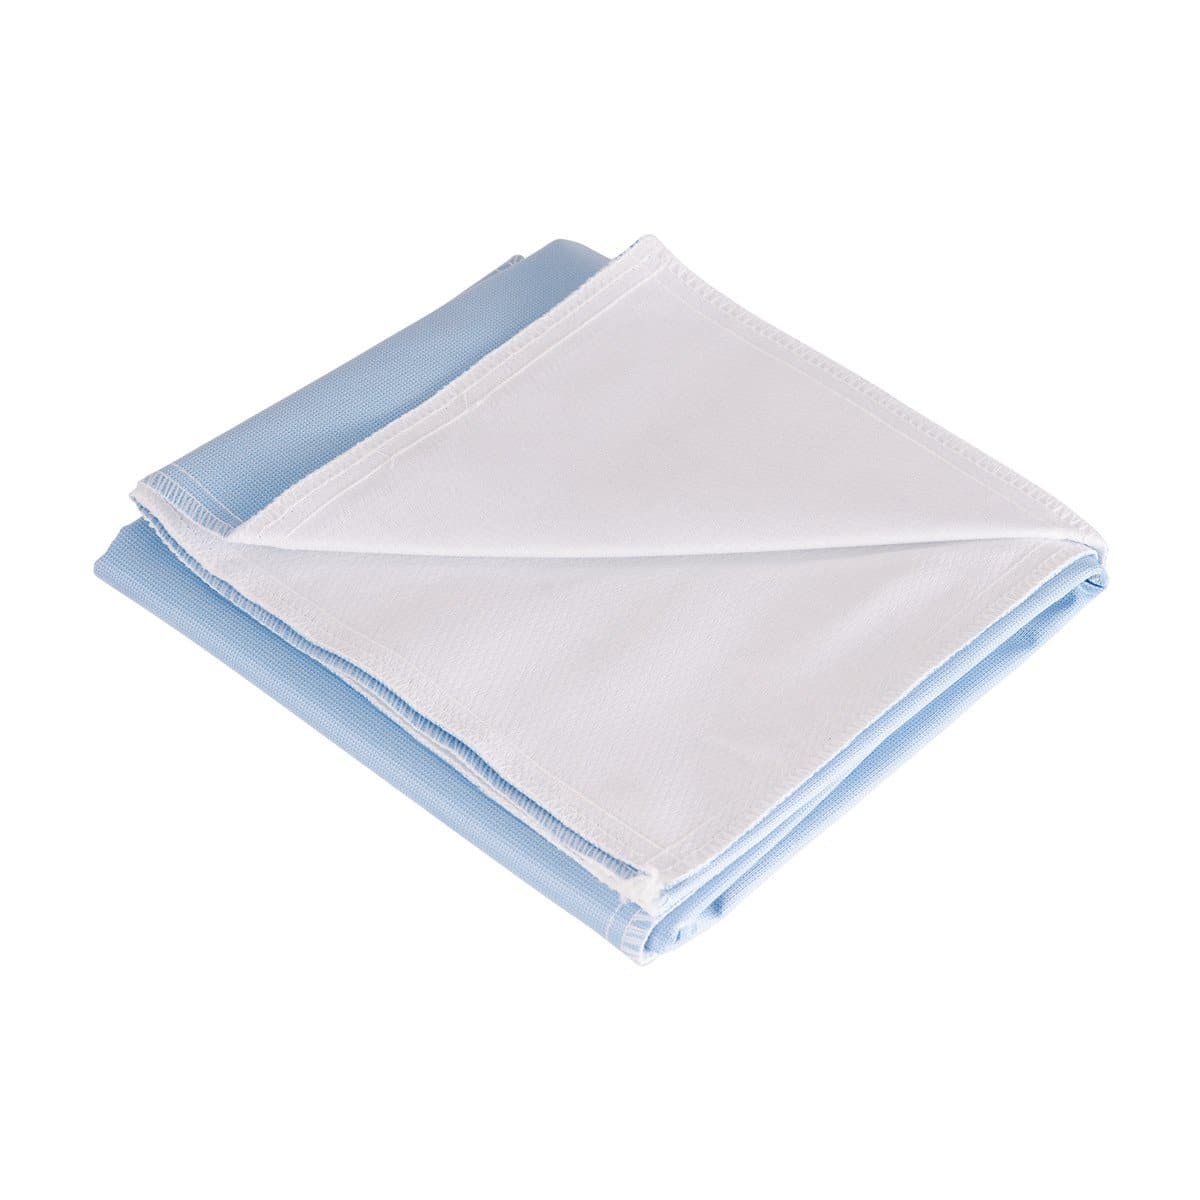 DMI Waterproof Furniture and Bed Protector Pad, 3 Ply, Reuseable - 34 x 24 - Blue - Senior.com Underpads